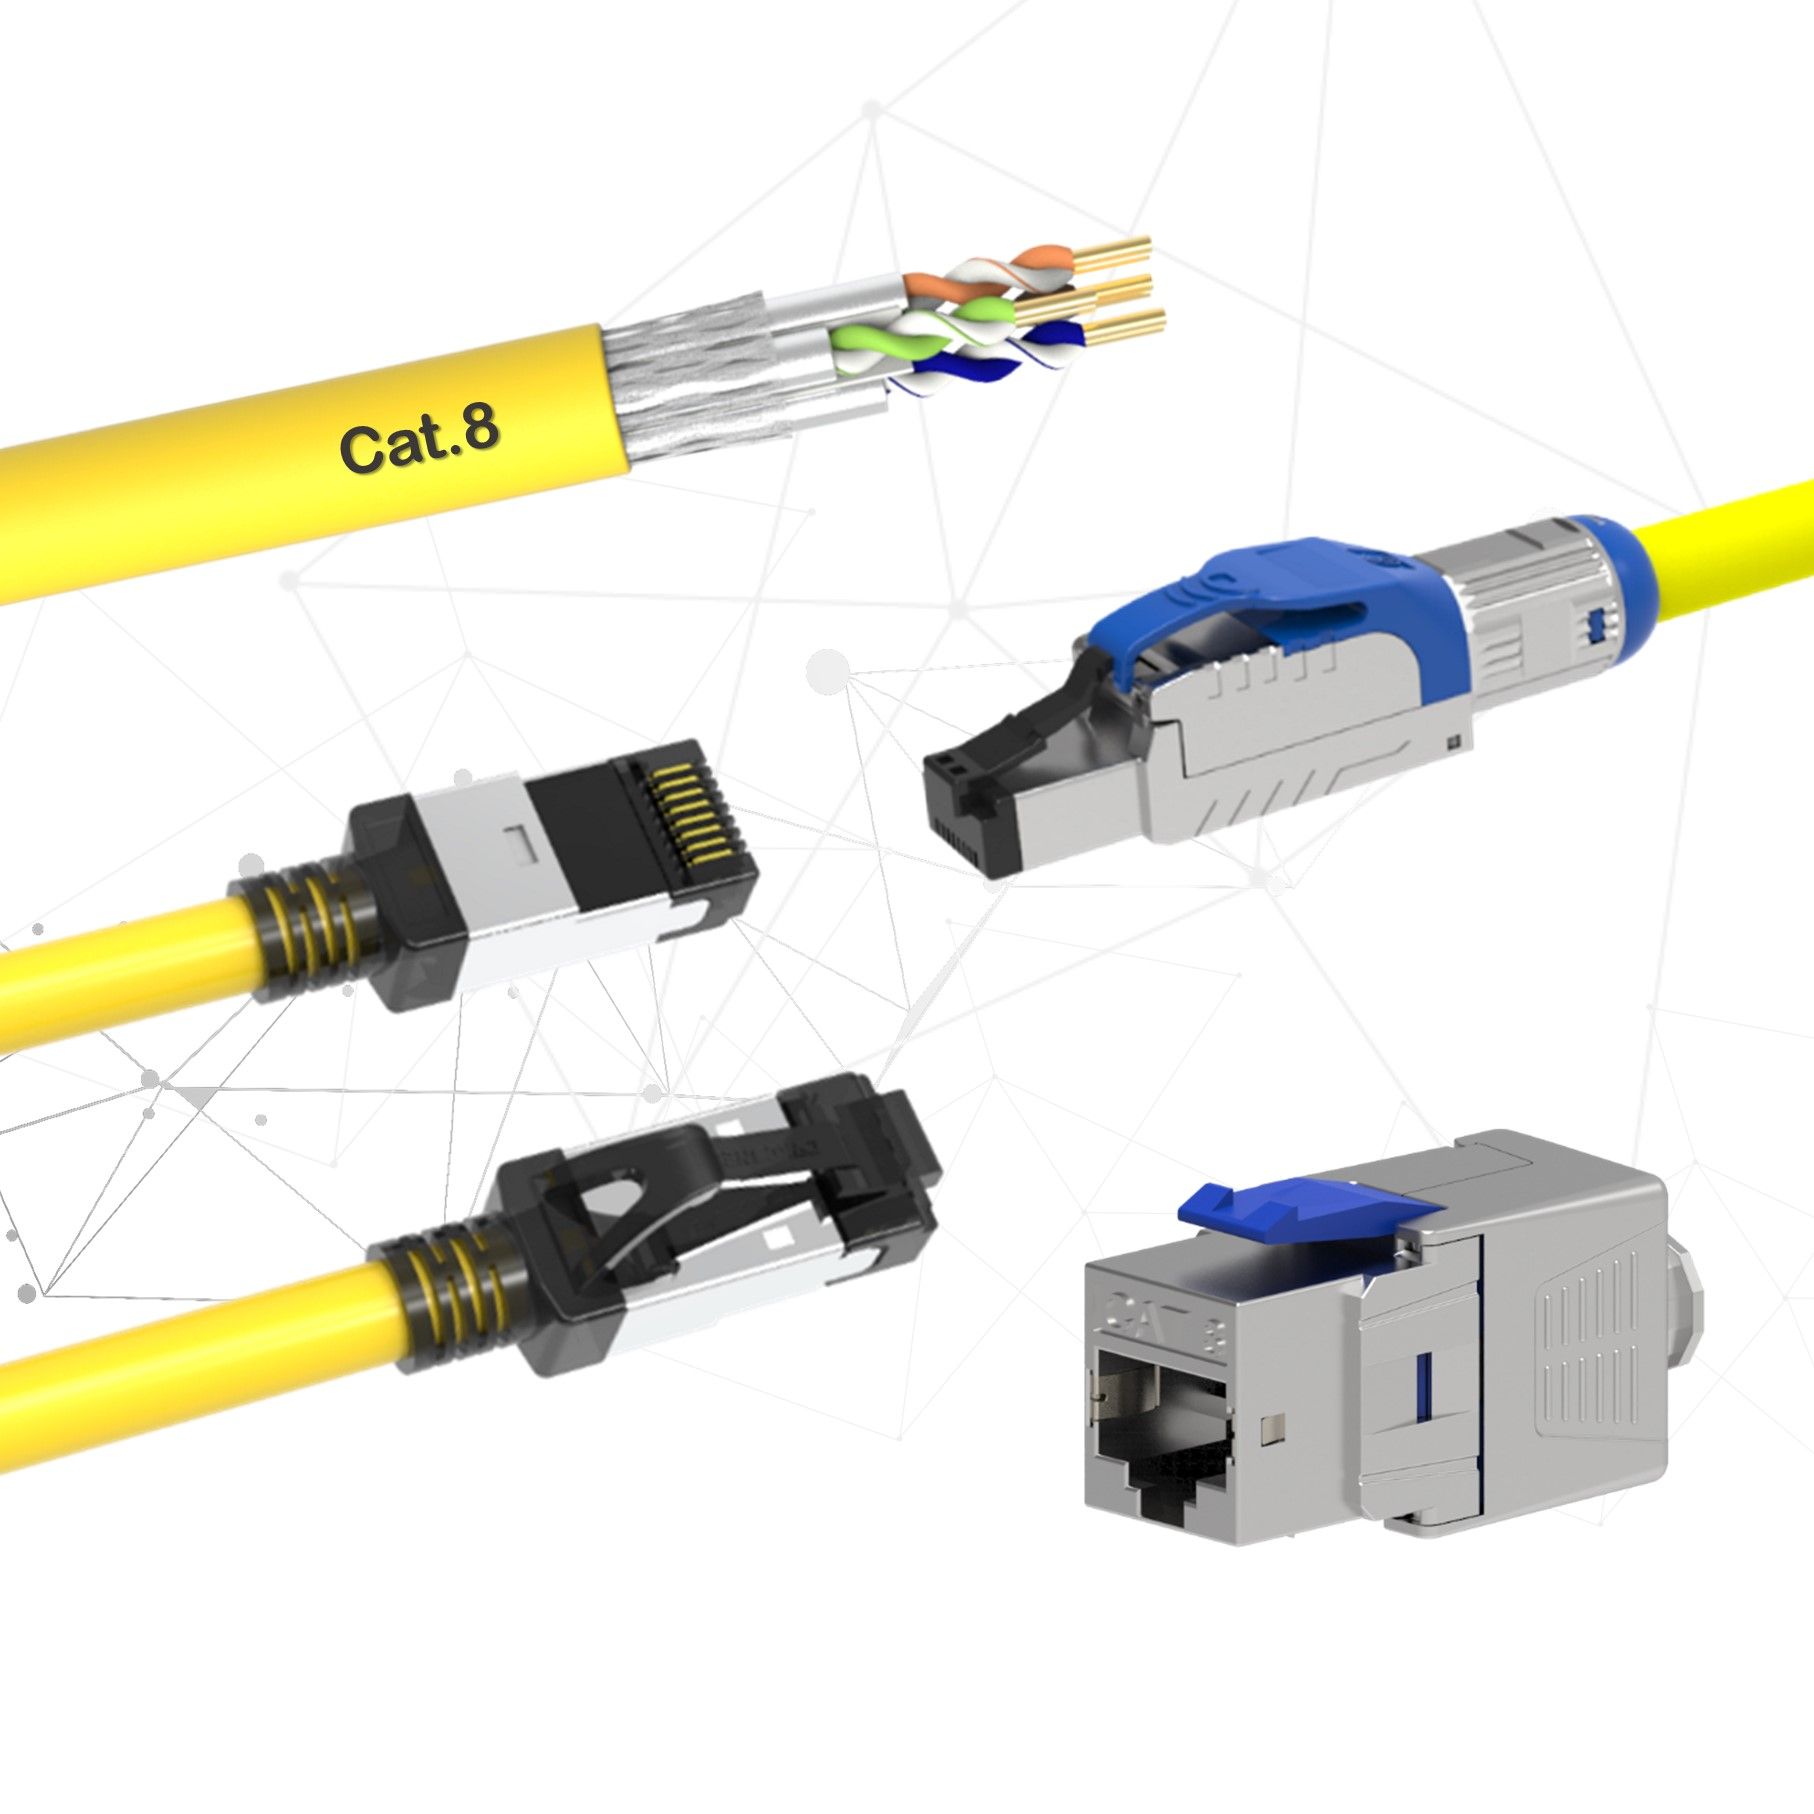 Cat8 Structured Cabling  Top-Quality Structured Cabling & Fiber